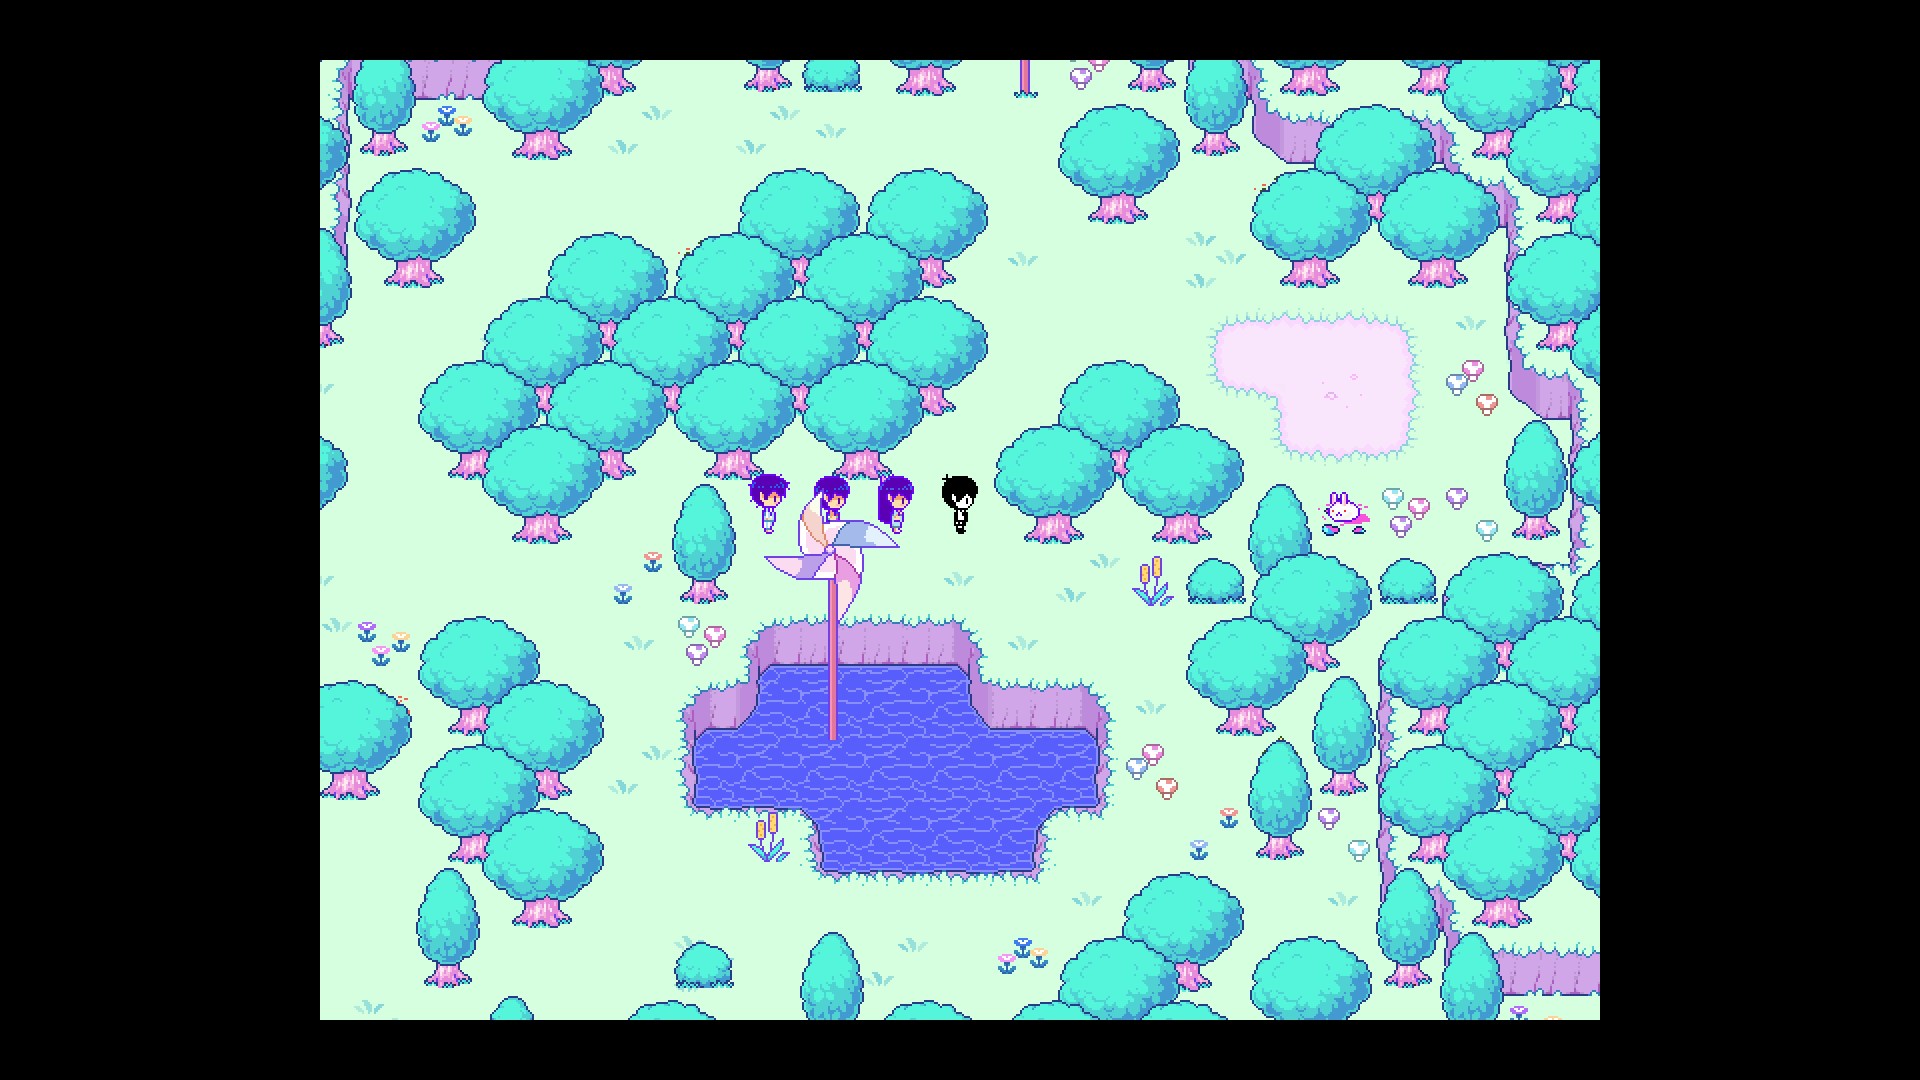 OMORI - Vast Forest Boss & Enemy Locations - MGW | Video Game Guides,  Cheats, Tips and Walkthroughs